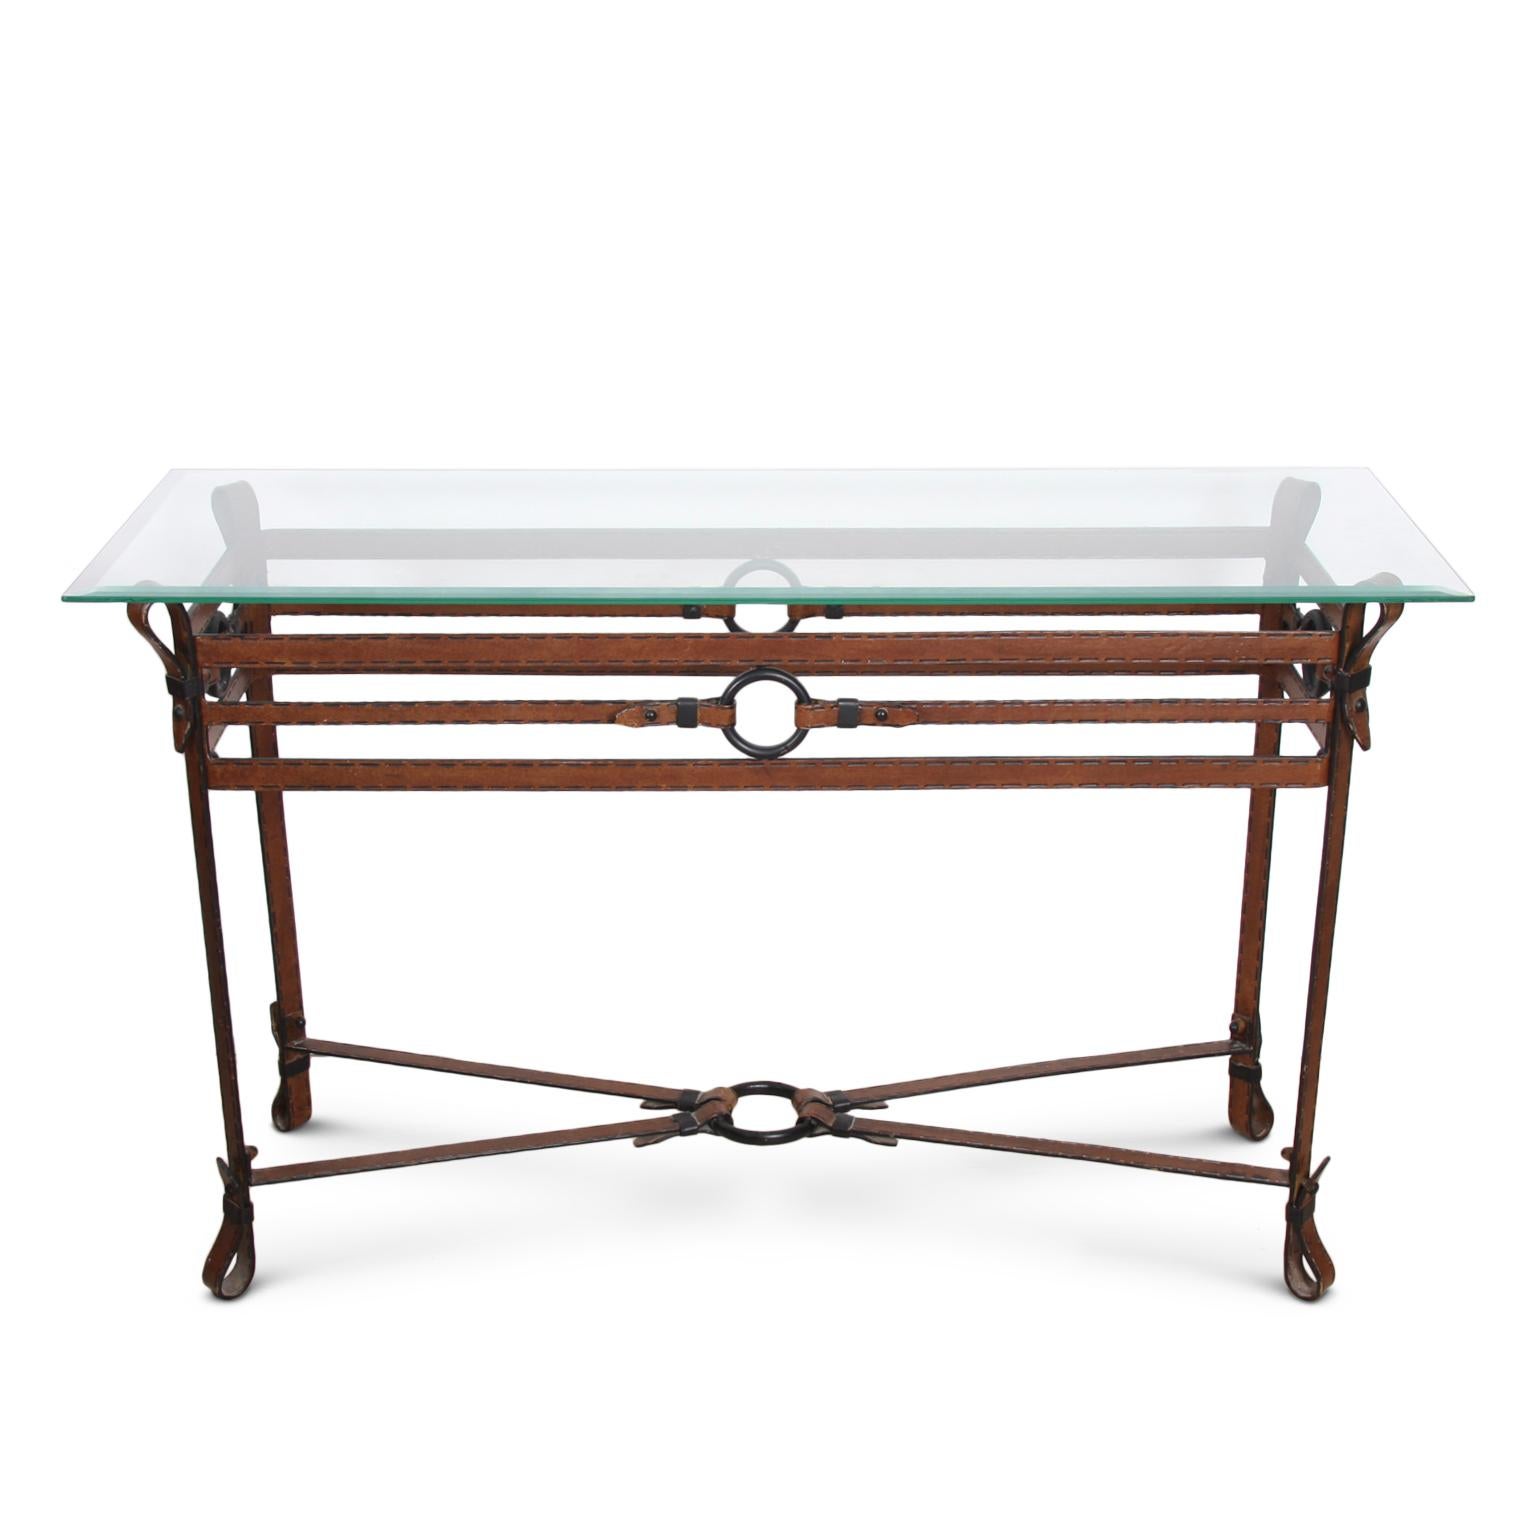 A handsome metal strap console table in the style of Jacques Adnet dating to the 1970s with painted leather and stitch detail.